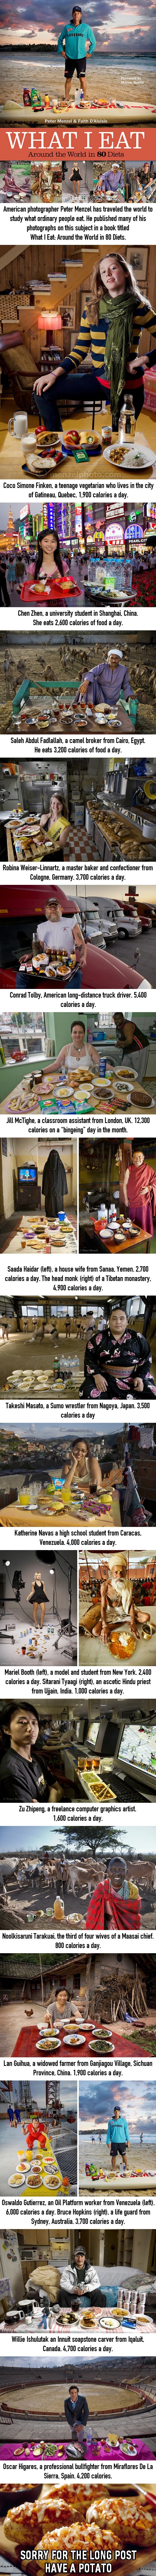 What ordinary people eat around the world